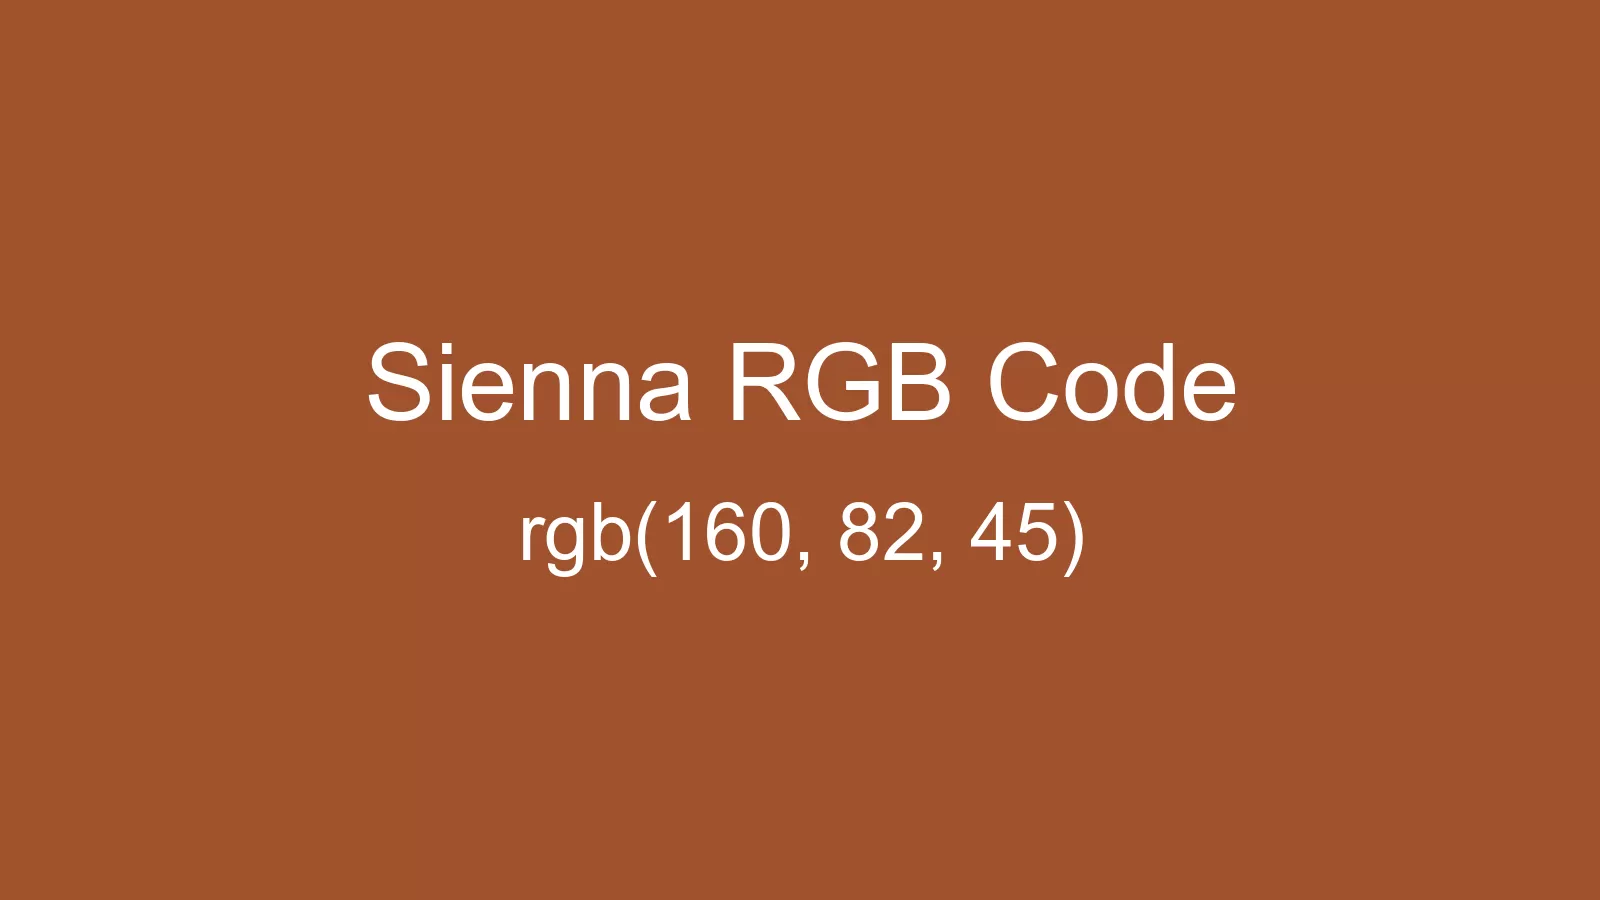 preview image of Sienna color and RGB code